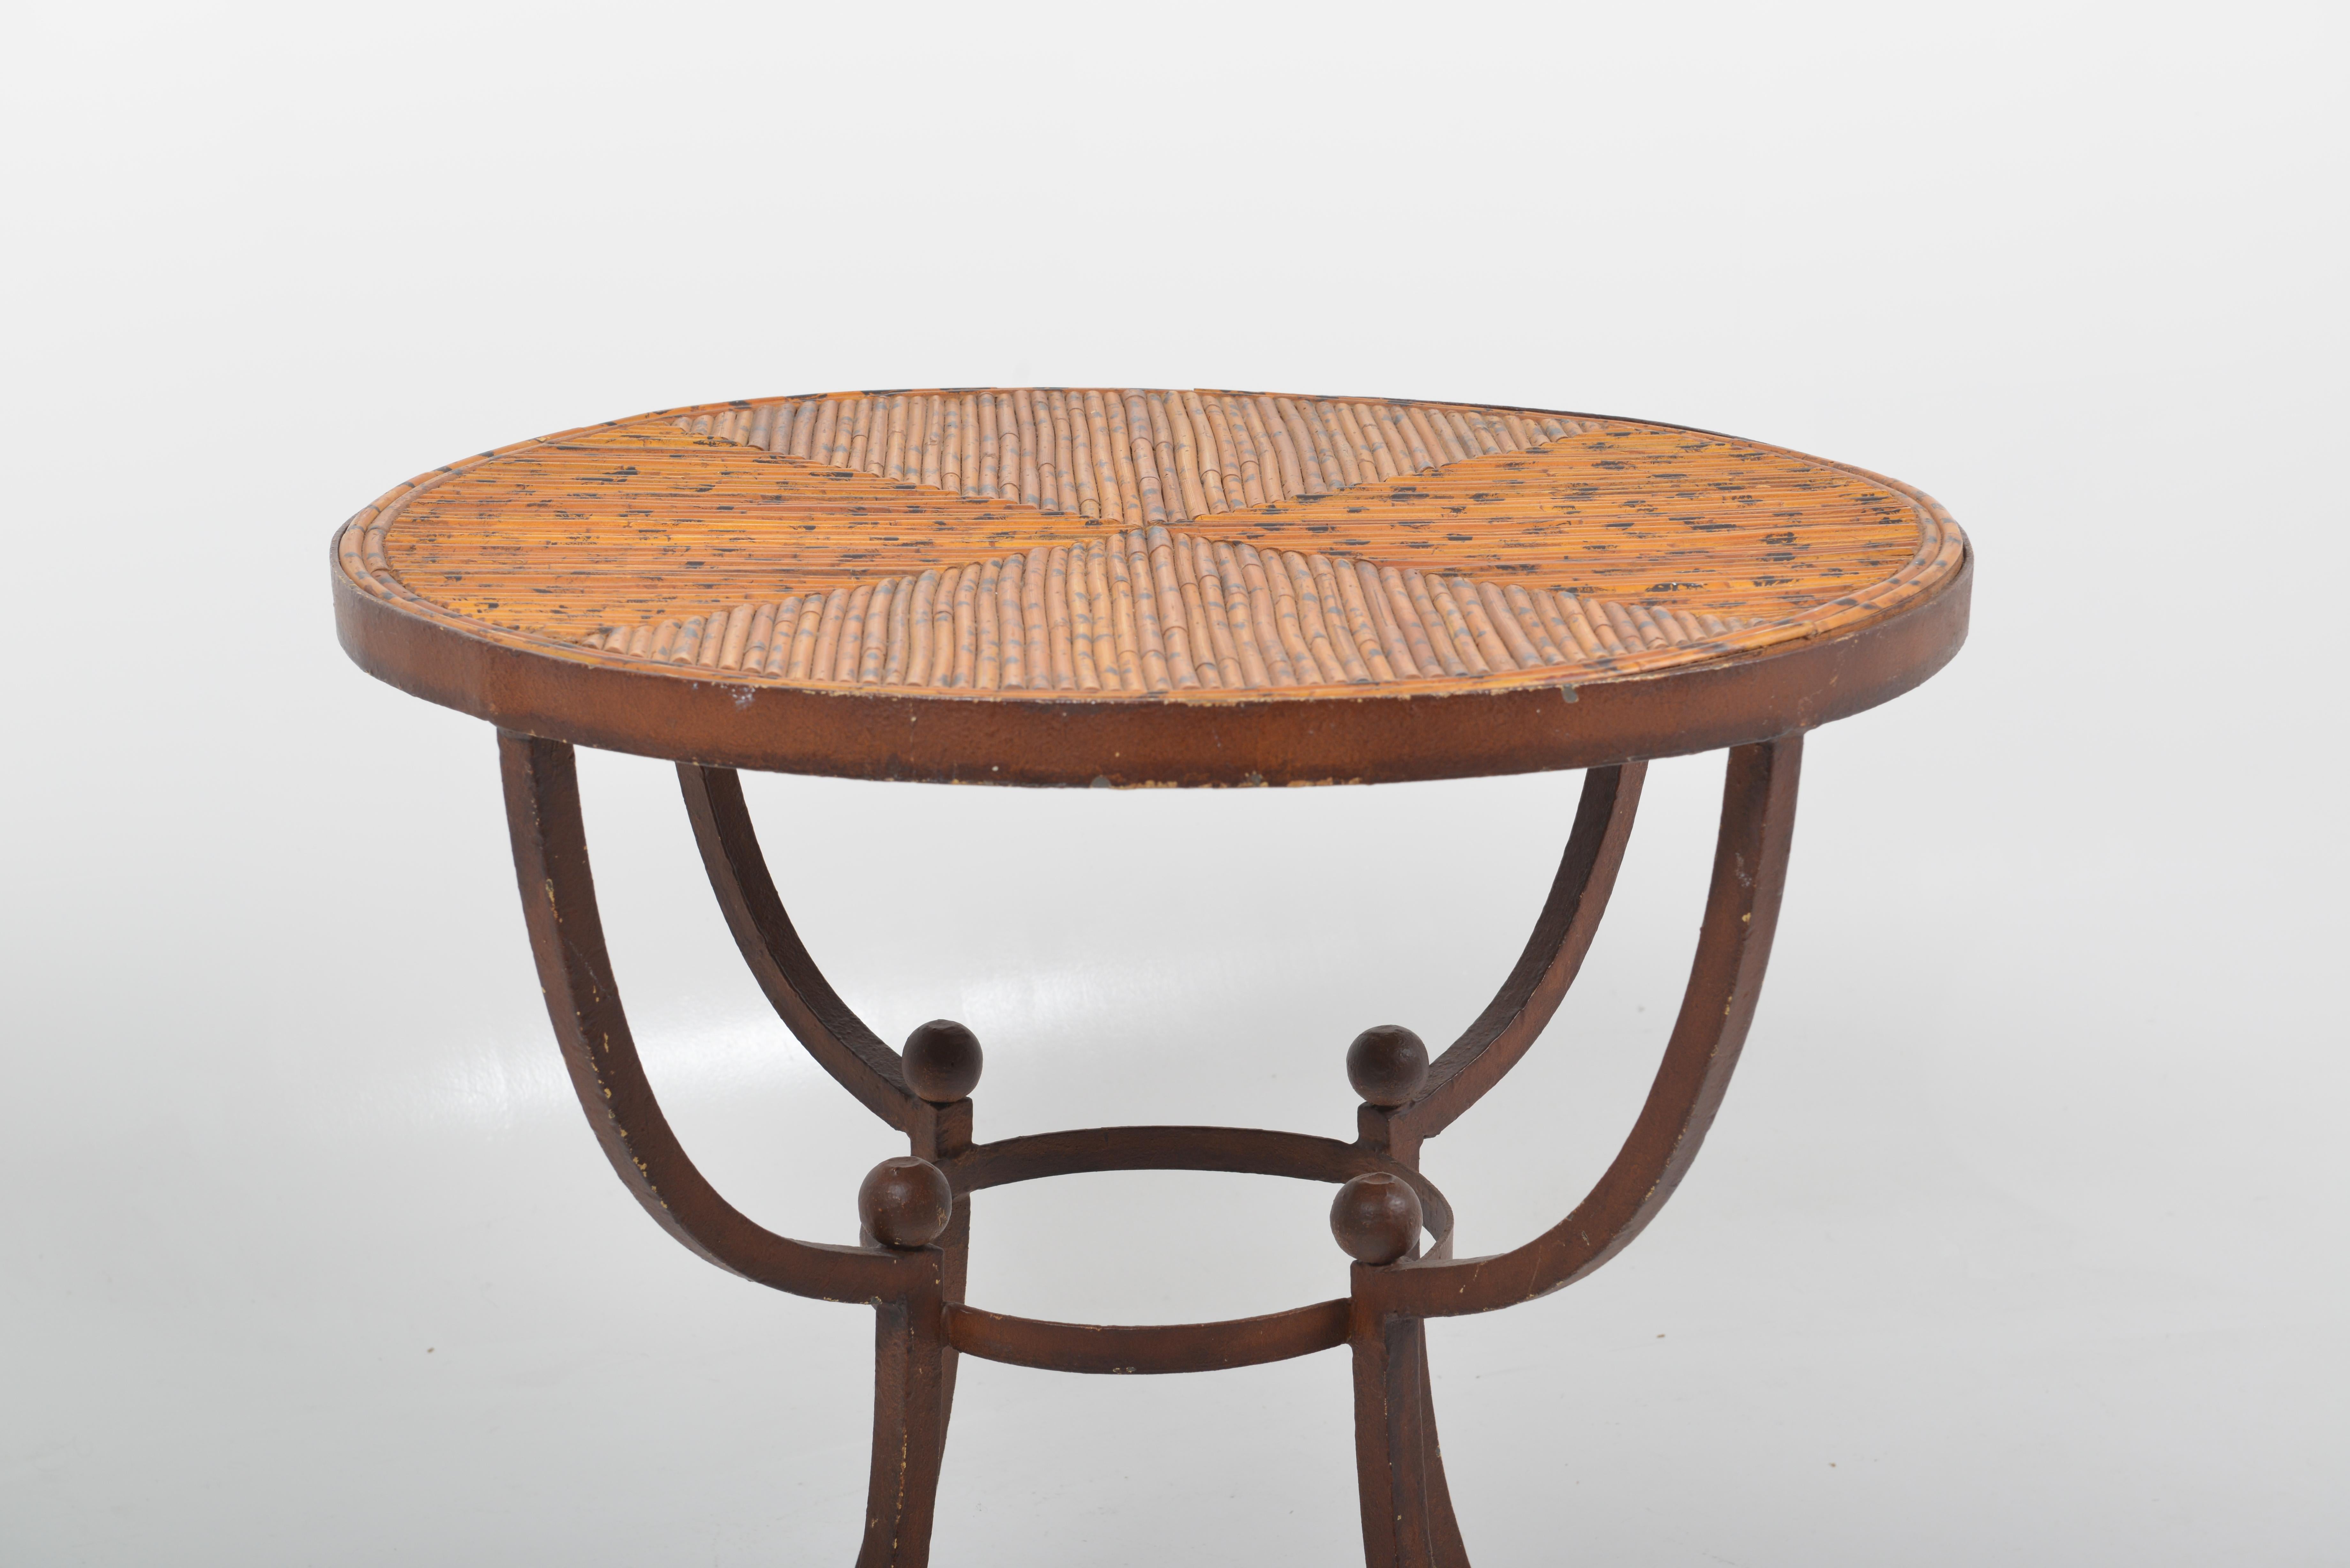 A bamboo and cast iron side table, France, 1920.

Unusual rustic or country house style art deco side table, made for a garden room or orangerie. The base is in a brownish patinated cast iron. The top is a parquetry of split bamboo painted with